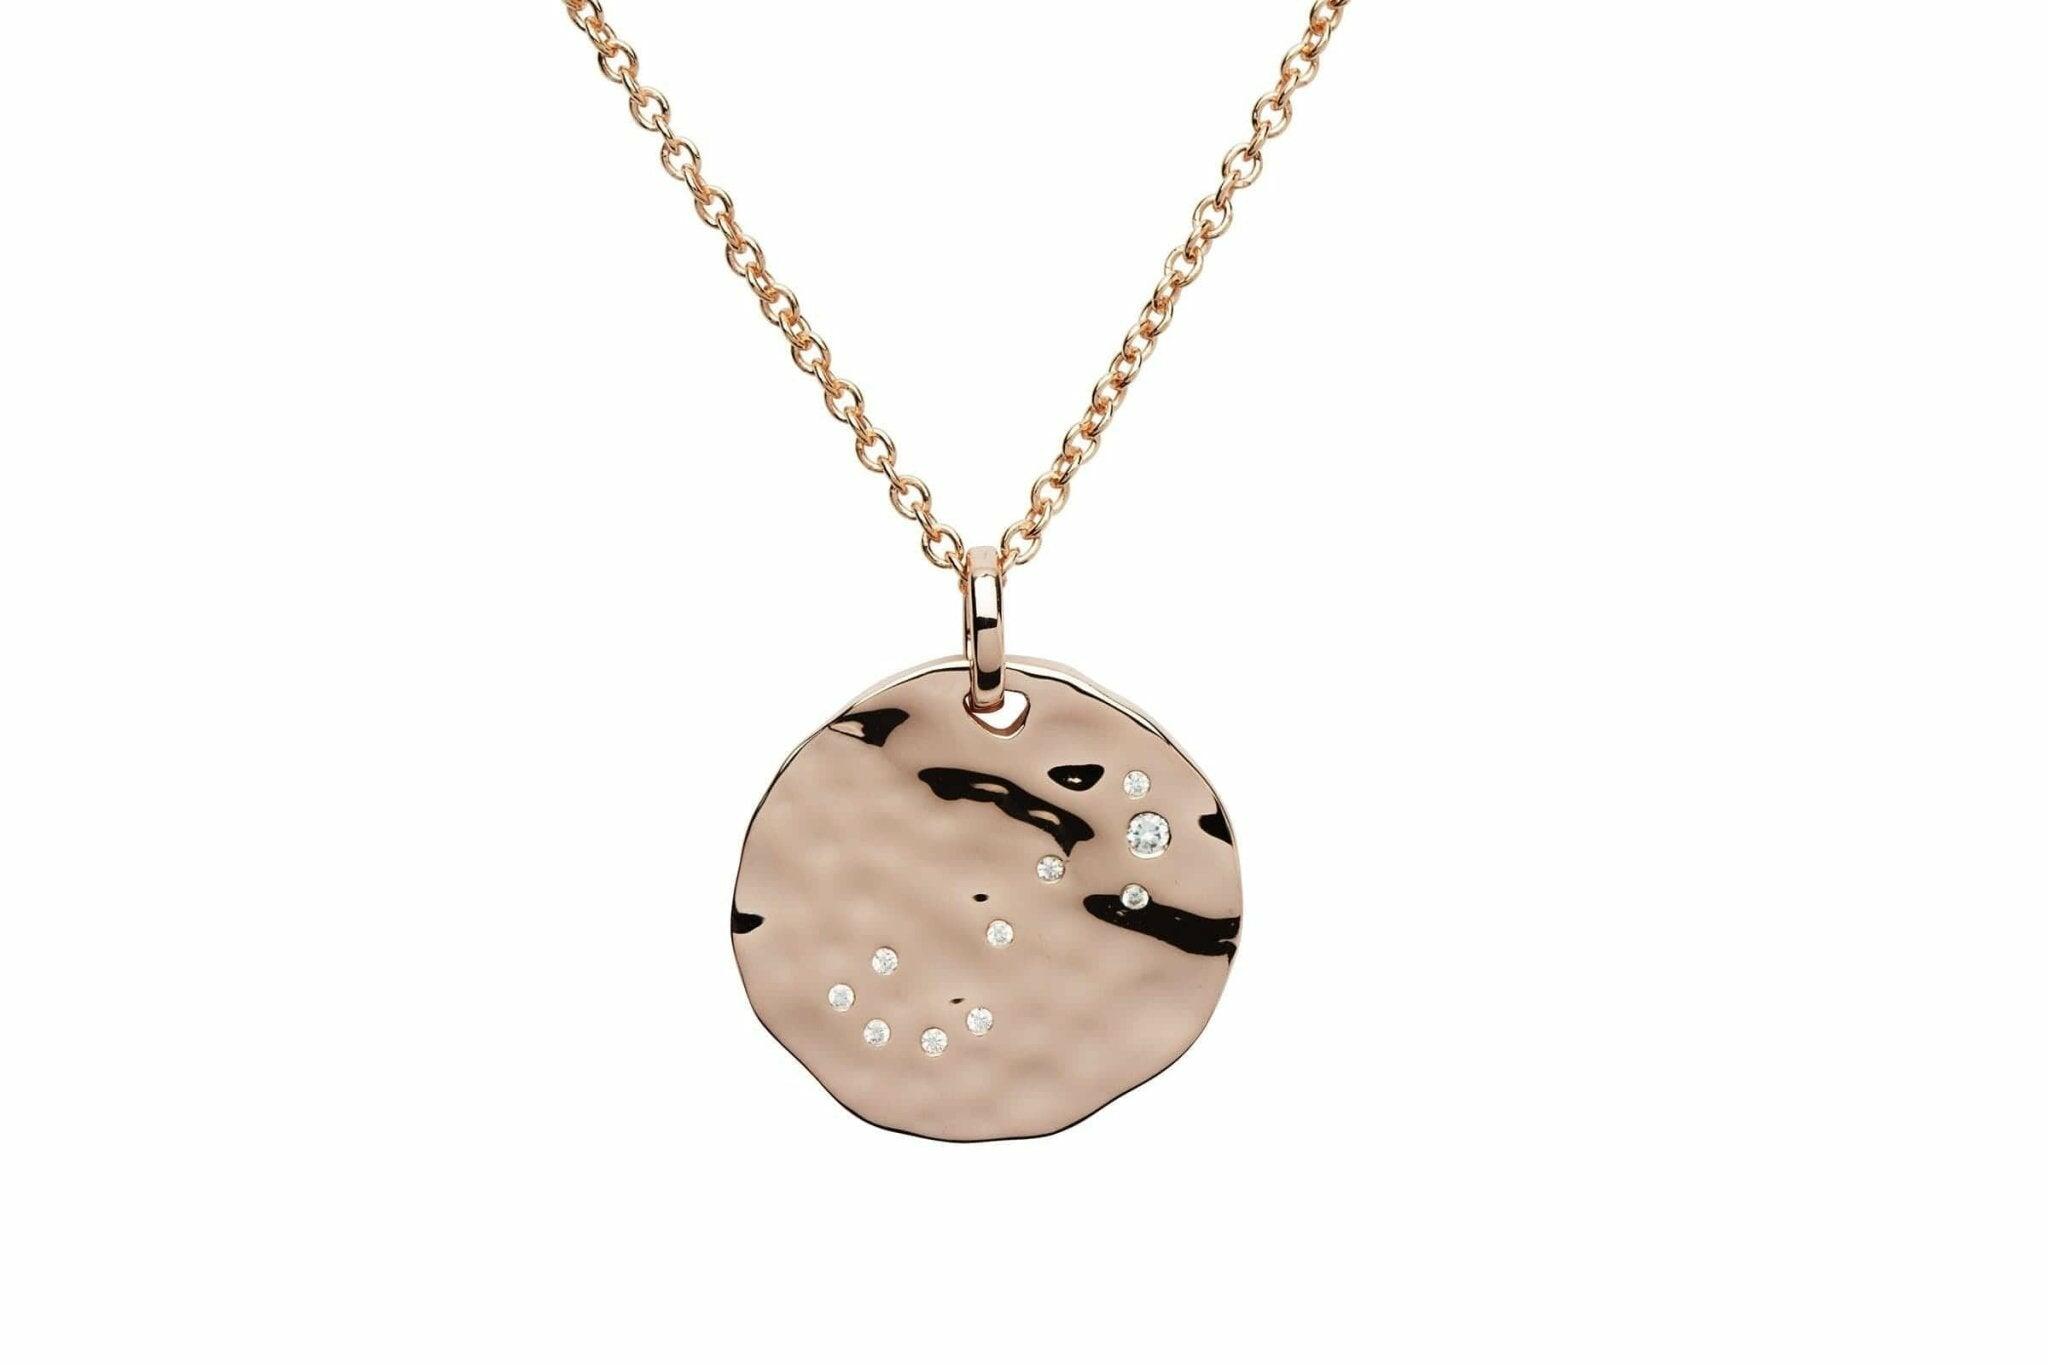 Unique & Co Hammered Sterling Silver Rose Gold Plated & Cubic Zirconia Zodiac Constellation Scorpio Birthday Necklace Pendant - The Classic Watch Buyers Club Ltd